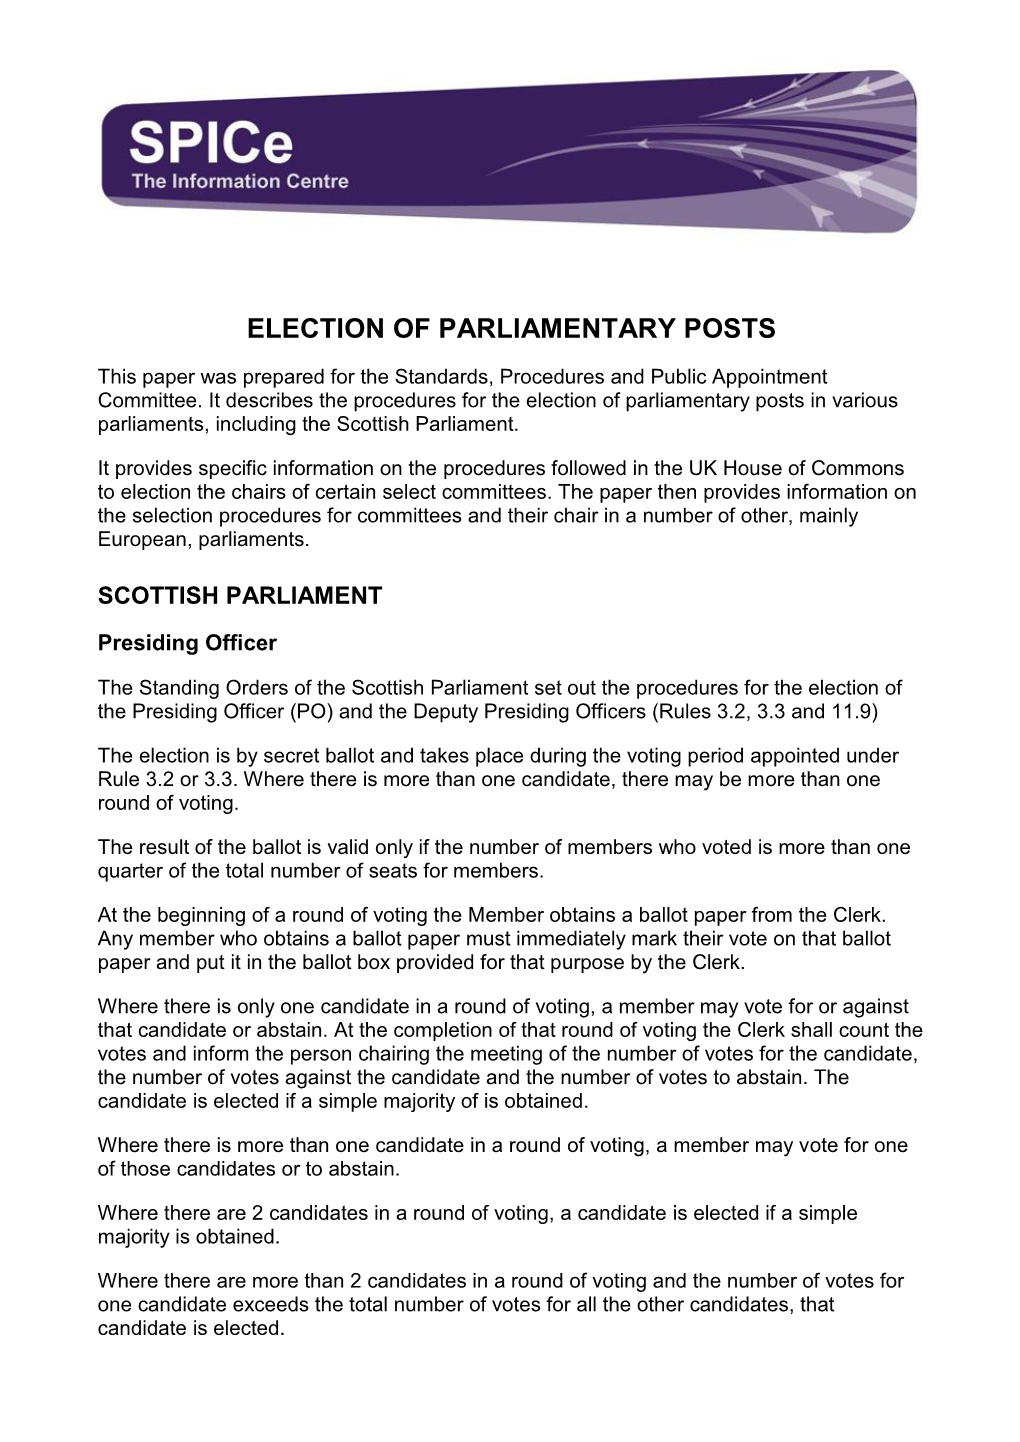 Spice Briefing on the Election of Parliamentary